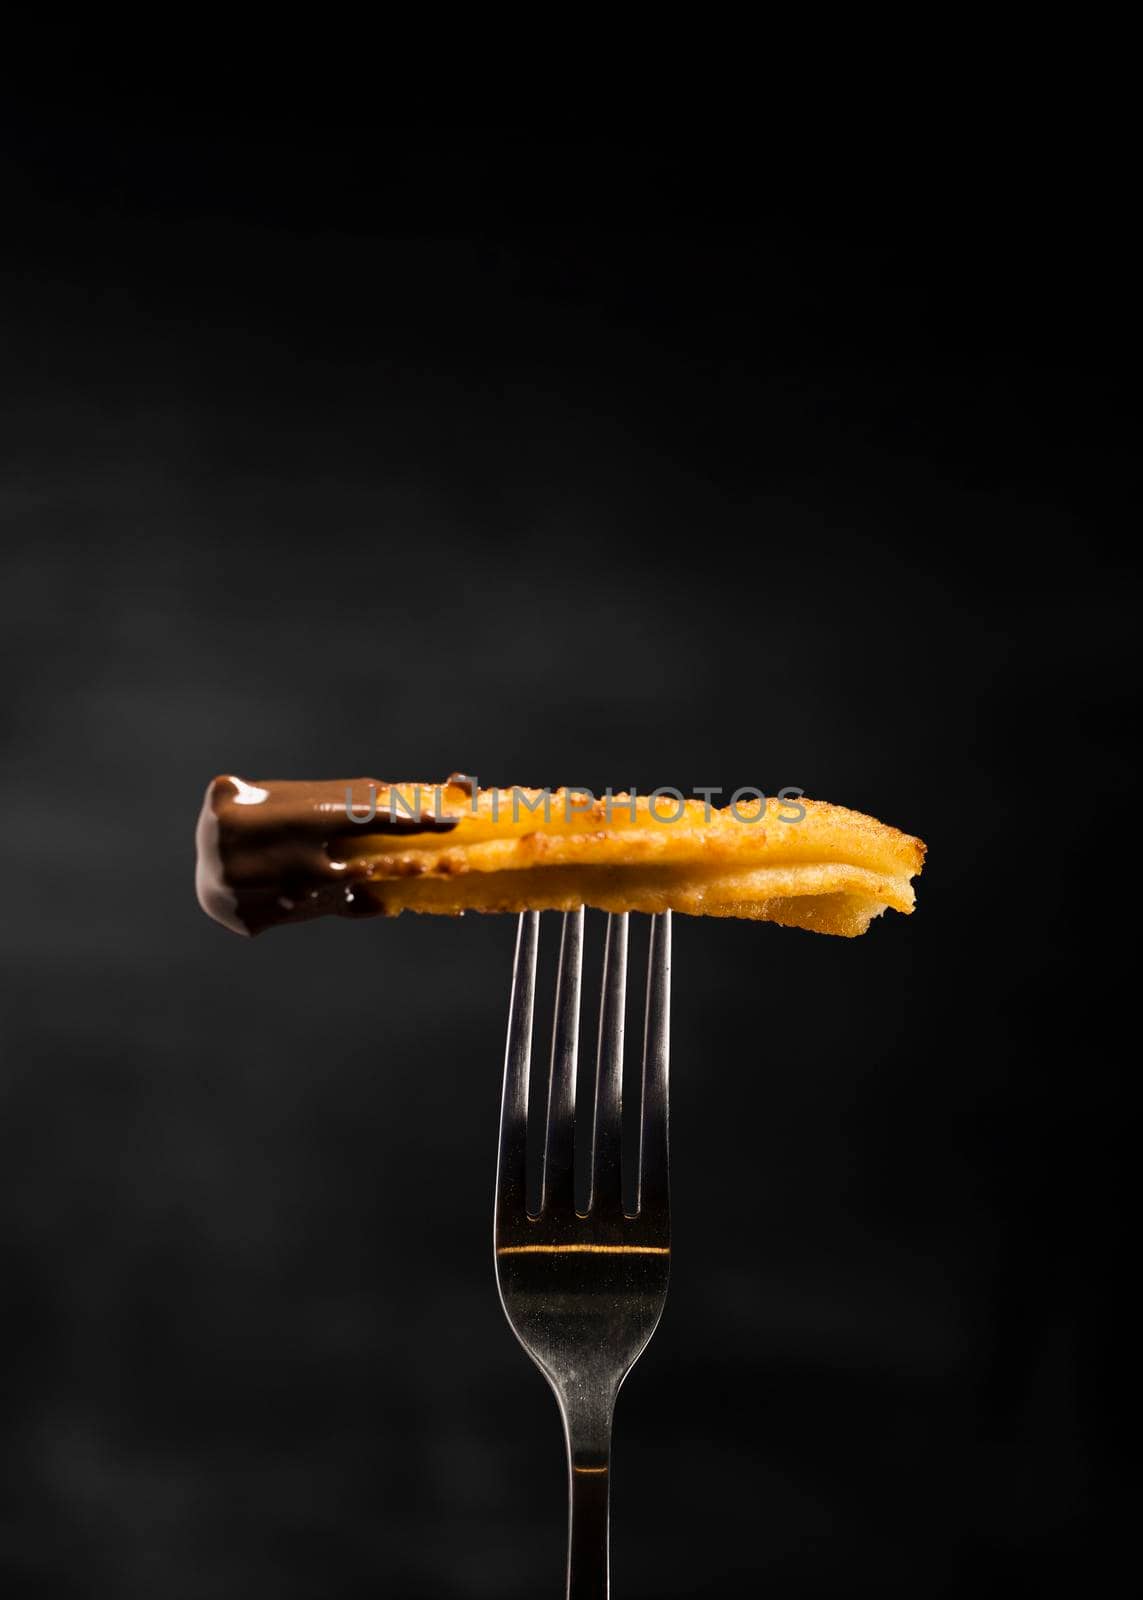 minimalist fried churros fork front view. High quality photo by Zahard